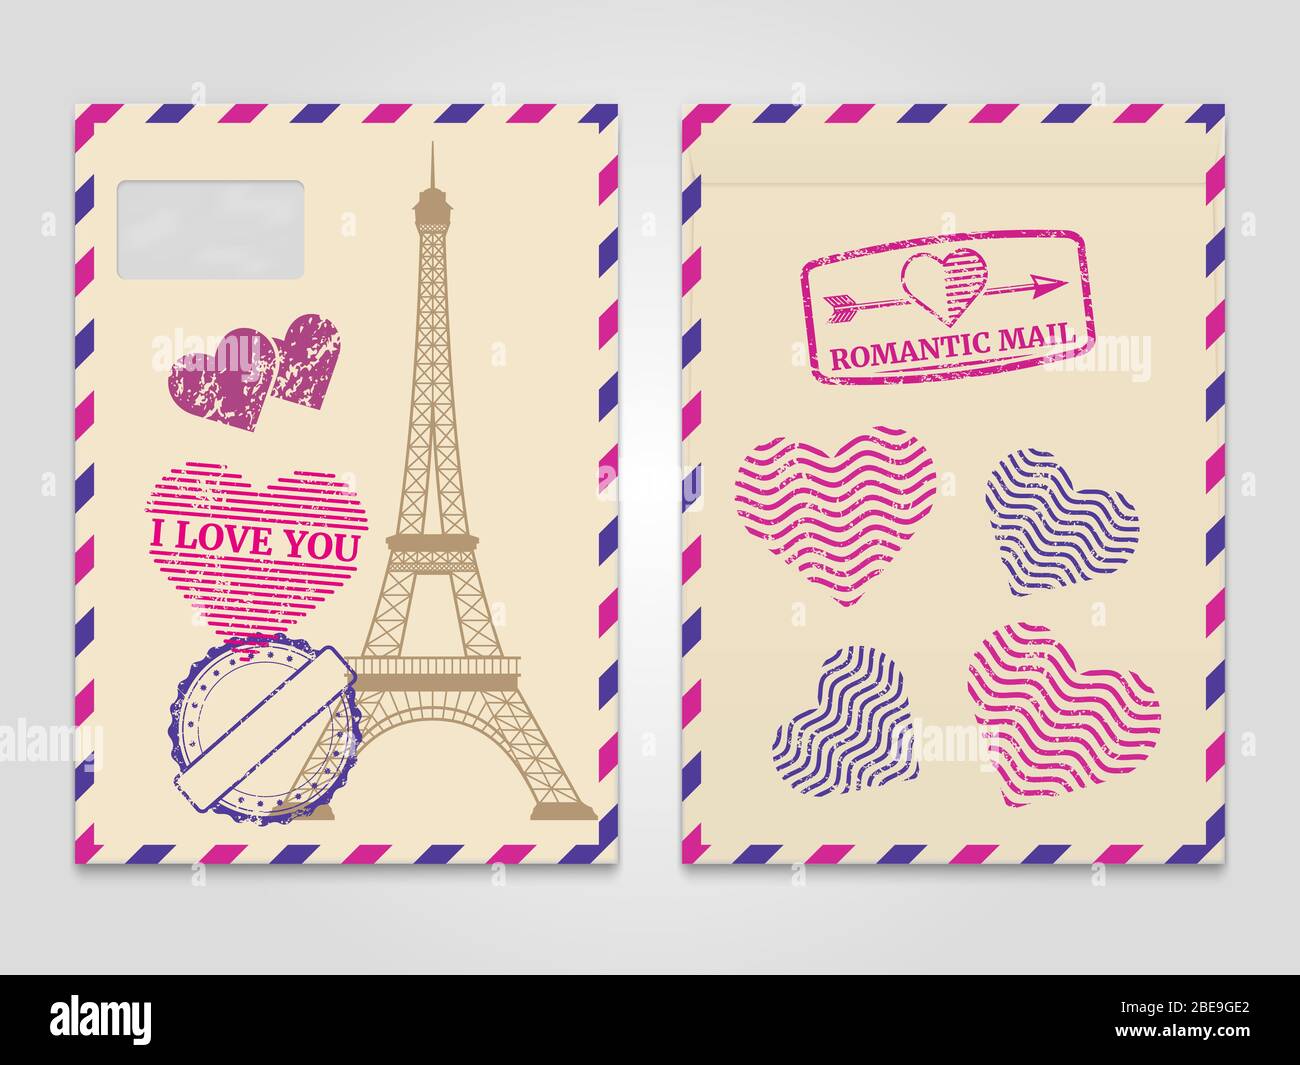 Vintage romantic envelopes with Eiffel tower and love stamps. Travel postcard romantic mail envelope. Vector illustration Stock Vector